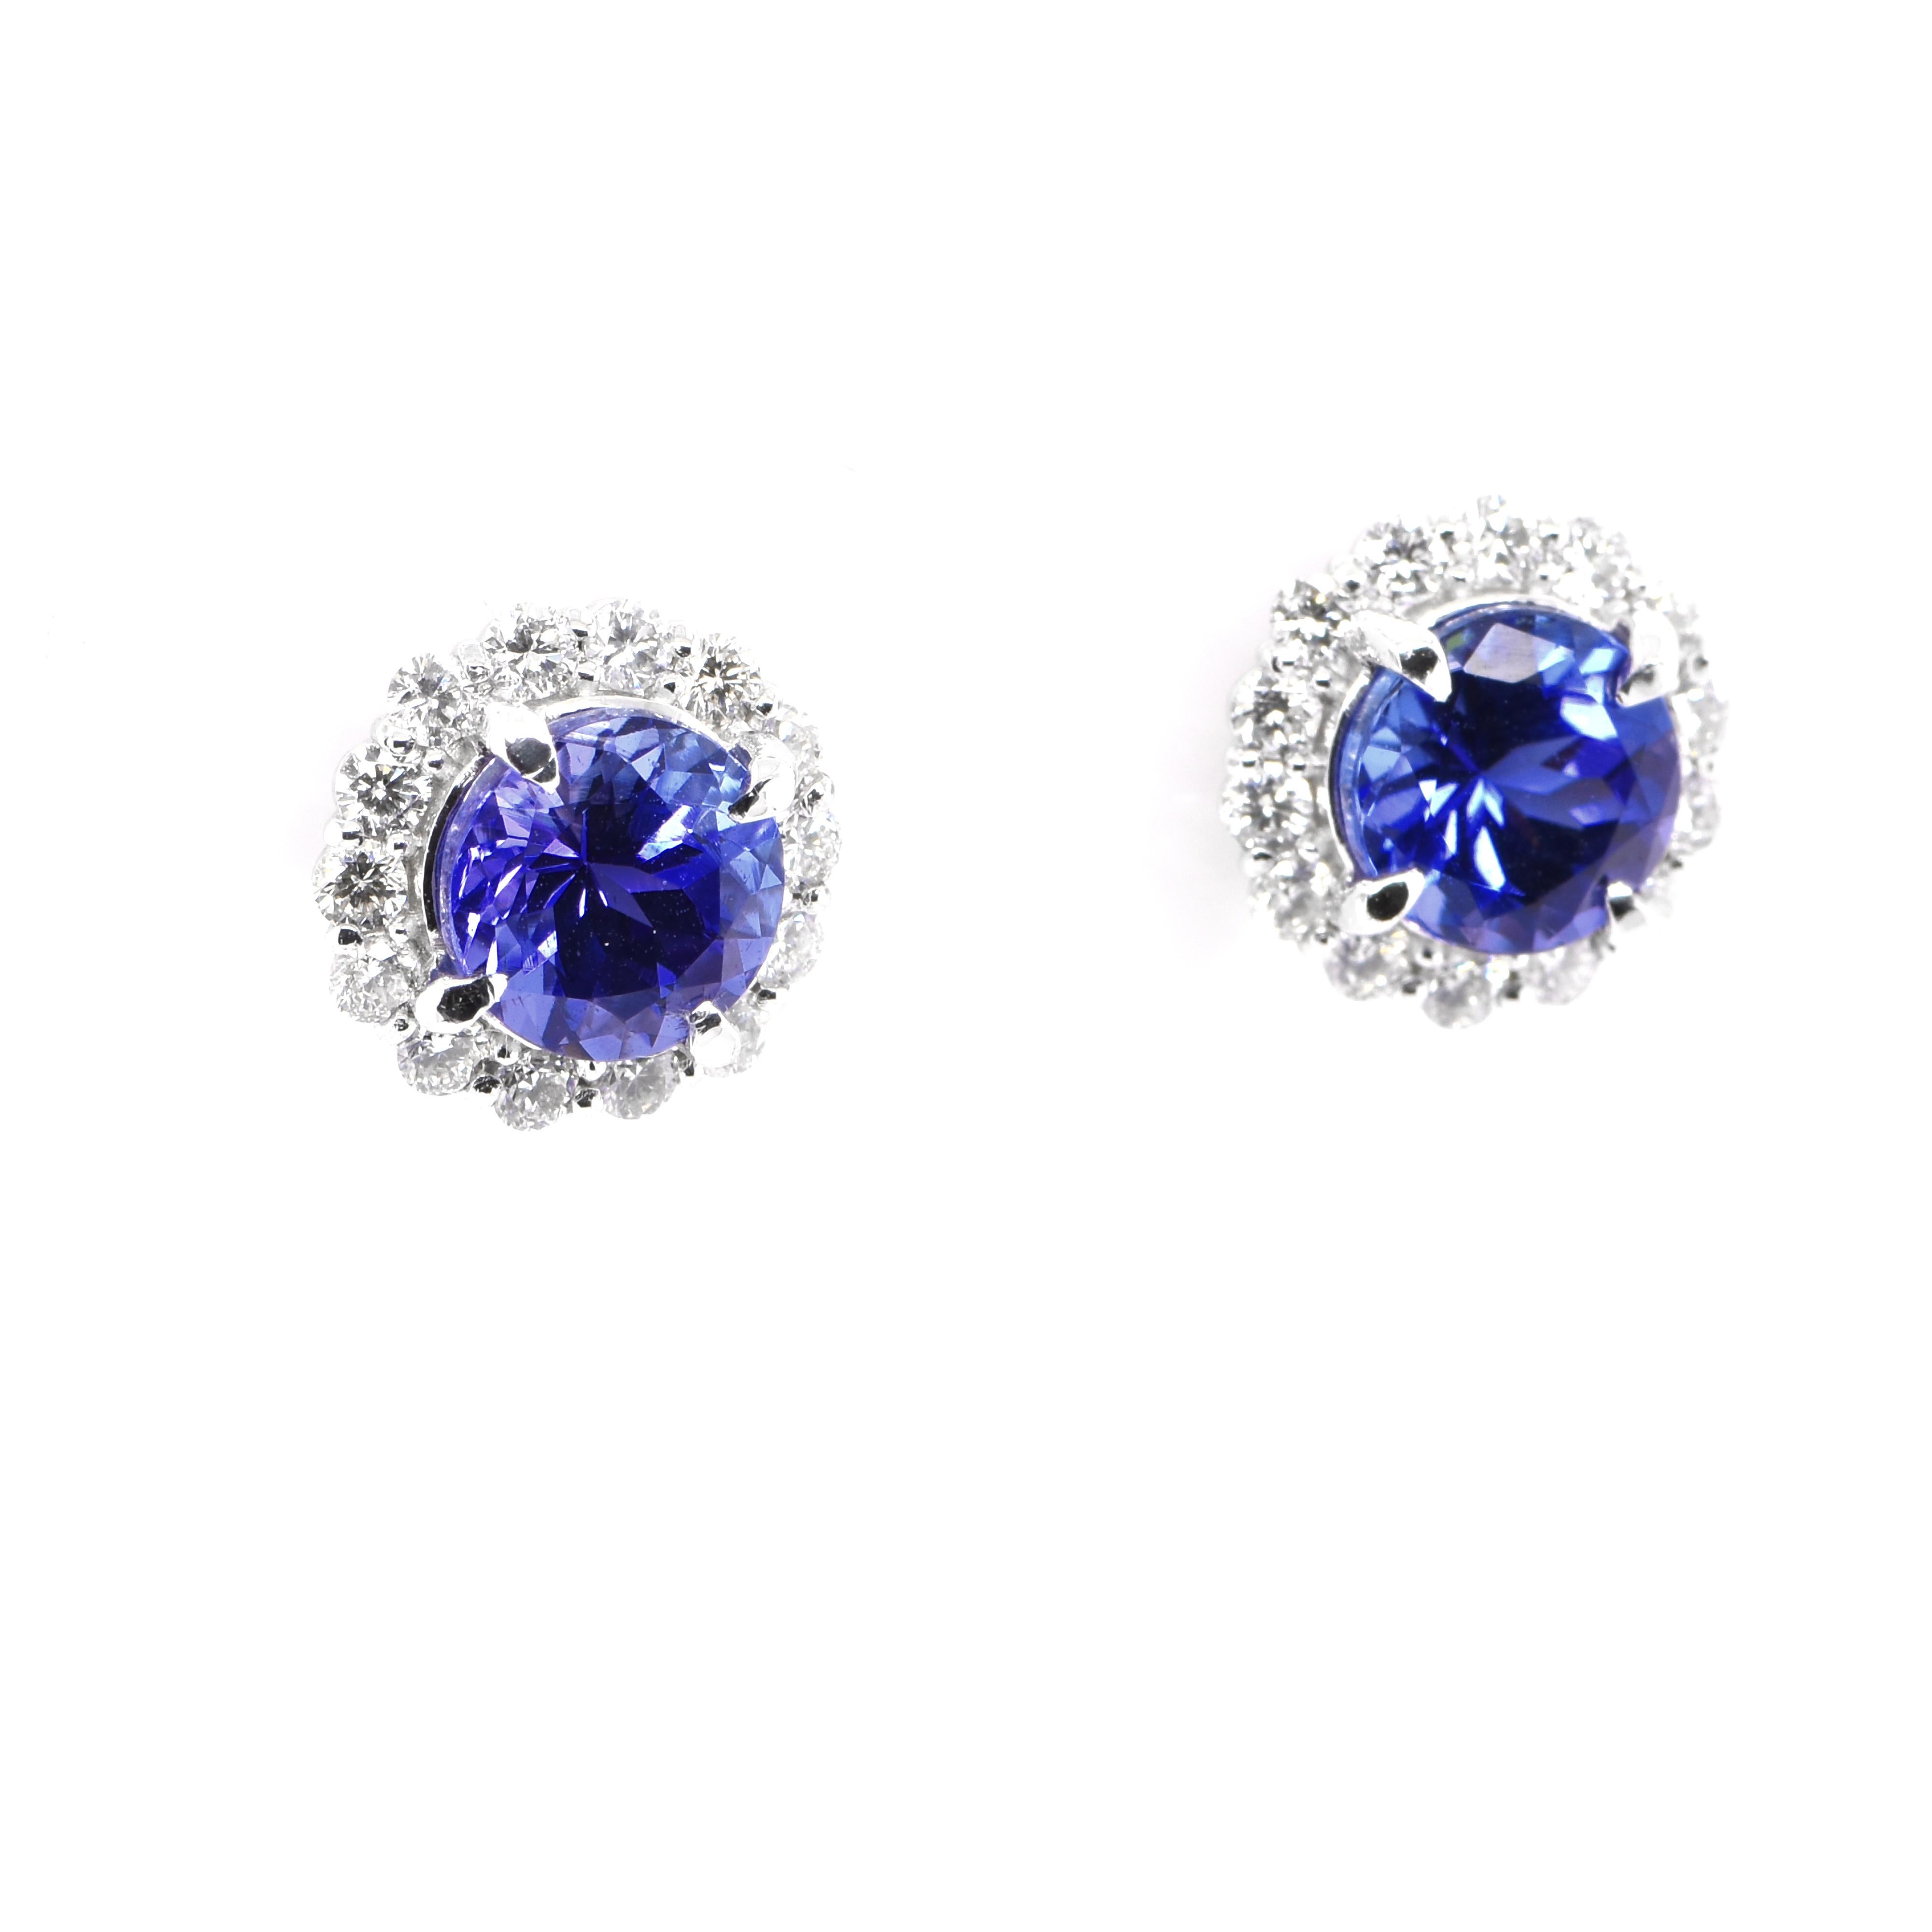 A beautiful pair of earrings featuring a total 2.31 Carats Natural Tanzanites and 0.50 Carats of Diamond Accents set in Platinum. Tanzanite's name was given by Tiffany and Co after its only known source: Tanzania. Tanzanite displays beautiful